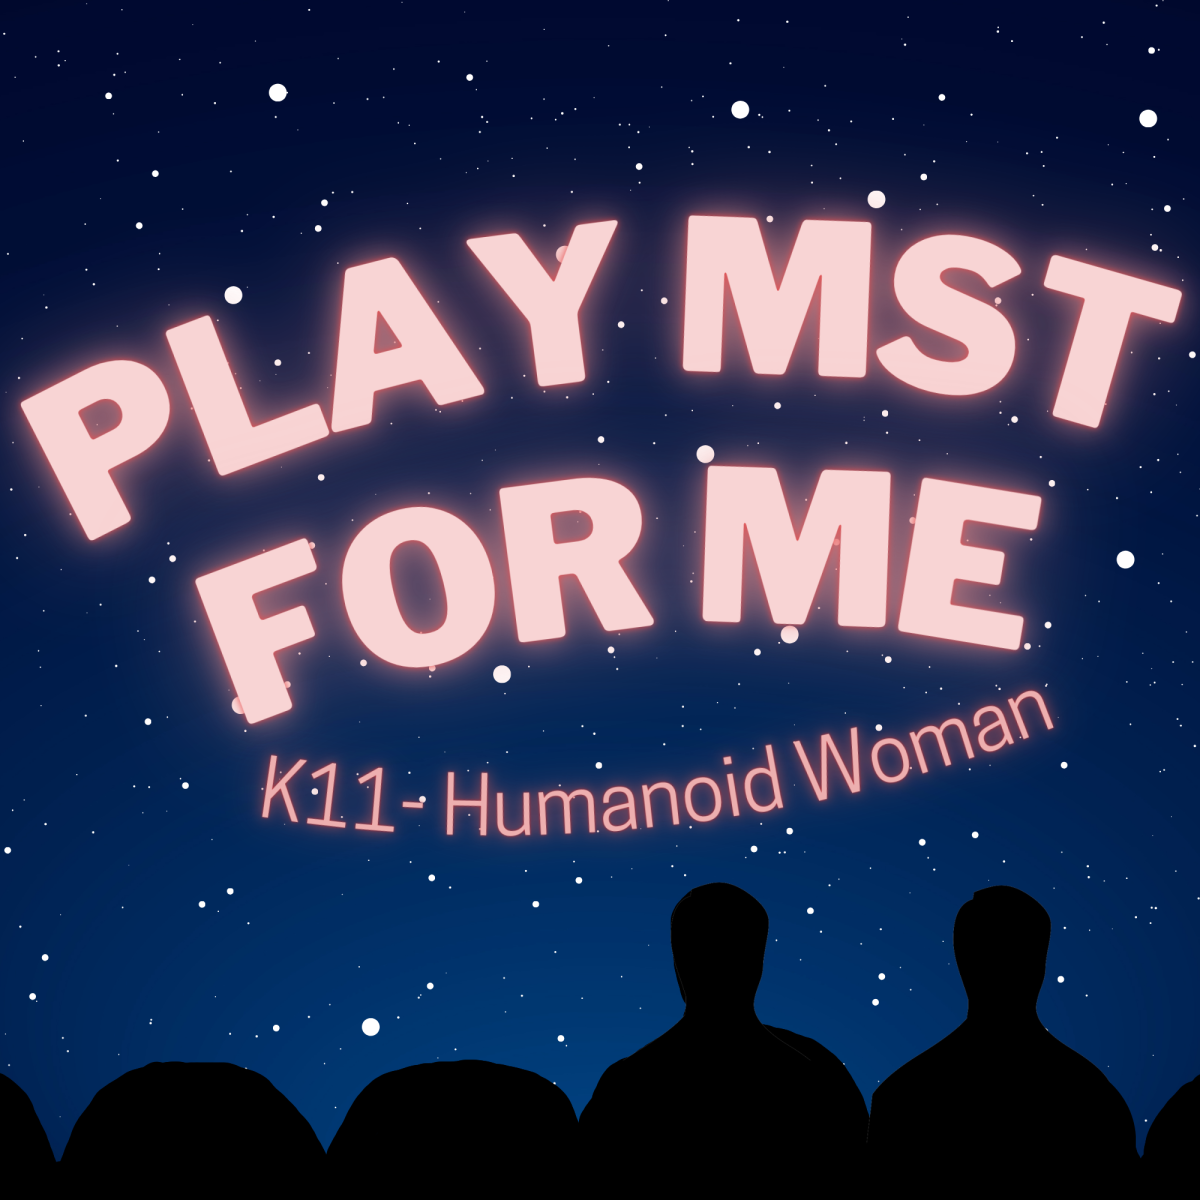 Play MST for Me #11: K11-Humanoid Woman